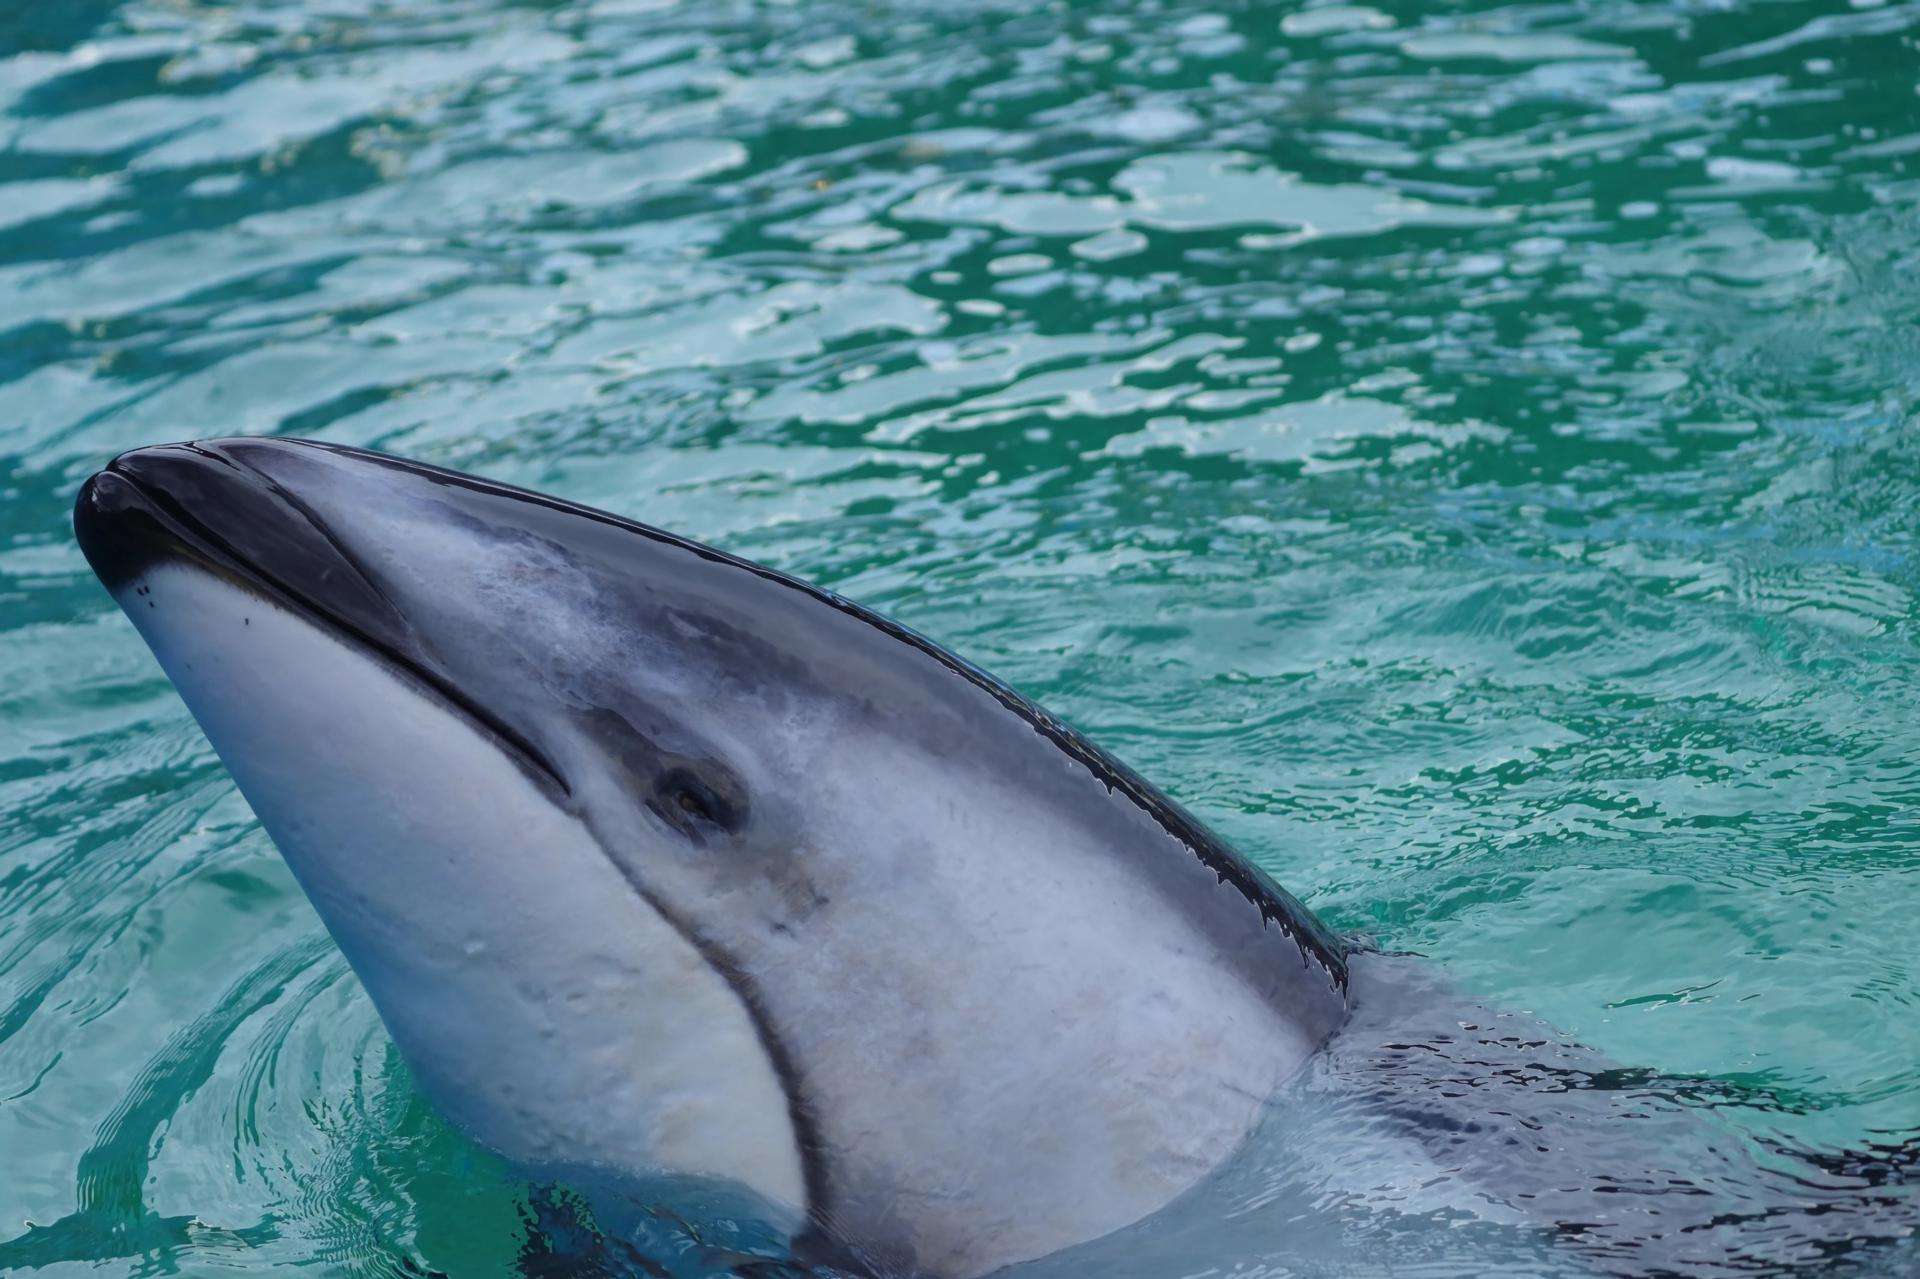 MIAMI (FL, USA), 09/25/2023.- Photo released by the Miami Seaquarium showing Li'i, a 200-pound dolphin, who had been living for 37 years in this aquarium and swam in the pond of the deceased orca Lolita, and who was transferred to a "better" habitat in Texas, where he will live "with other companions of his species", according to the Florida (USA) aquarium on Monday. EFE/Miami Seaquarium /EDITORIAL USE ONLY / NO SALES / ONLY AVAILABLE TO ILLUSTRATE THE ACCOMPANYING NEWS /CREDIT REQUIRED